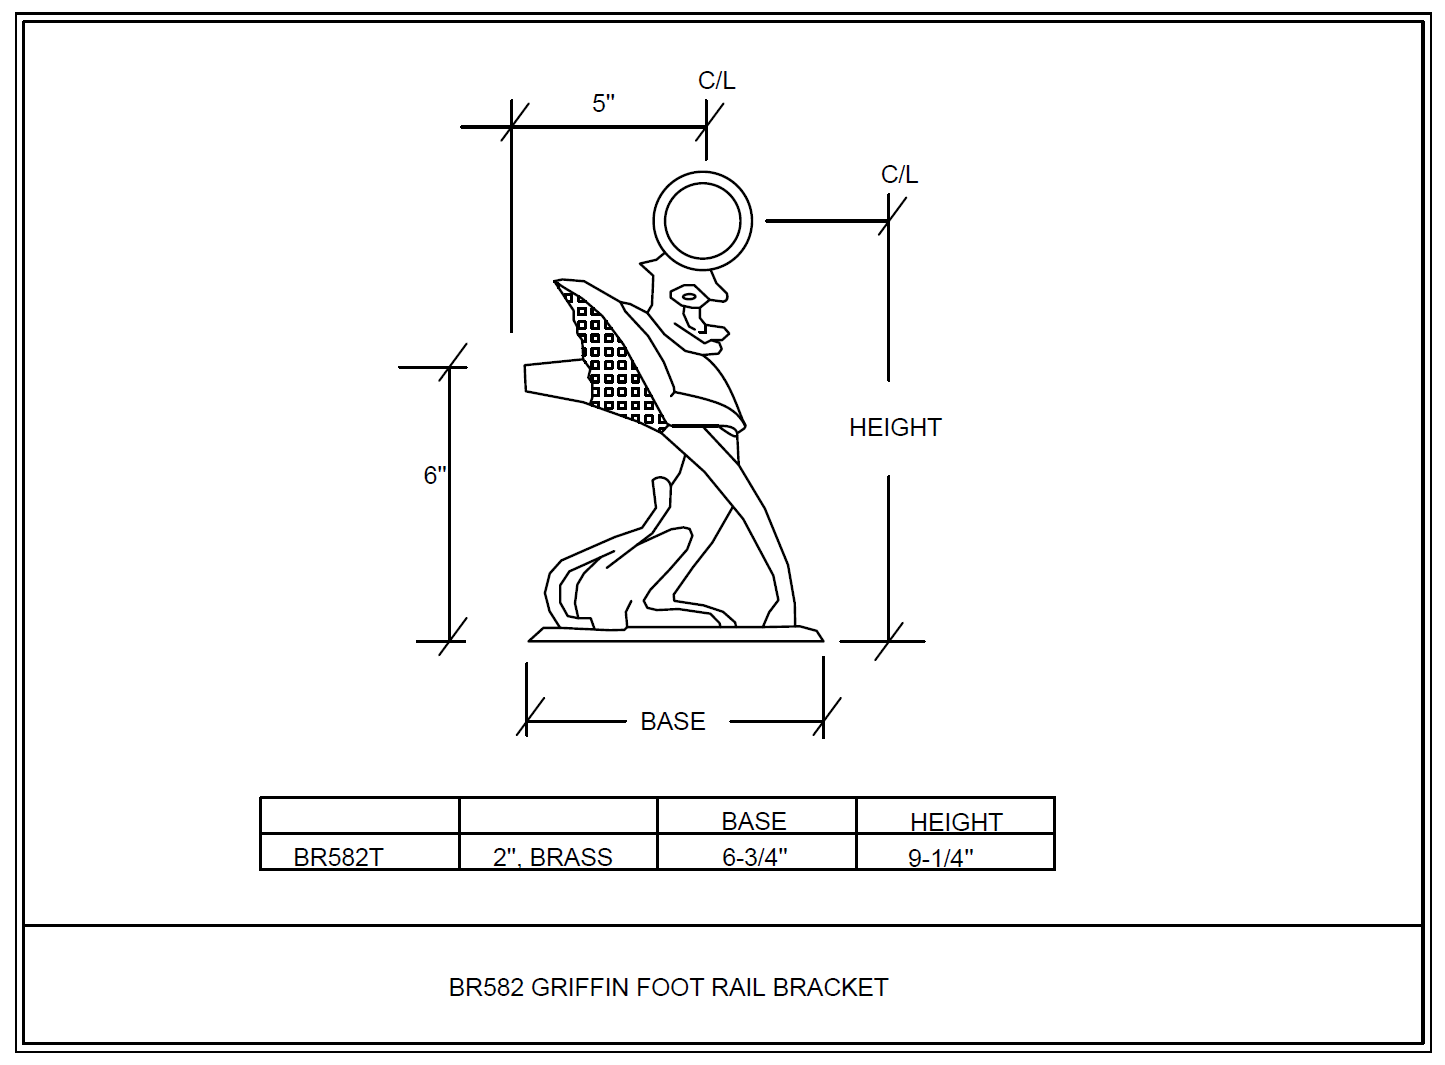 Foot Rail Griffin Bracket (2"OD) - All finishes